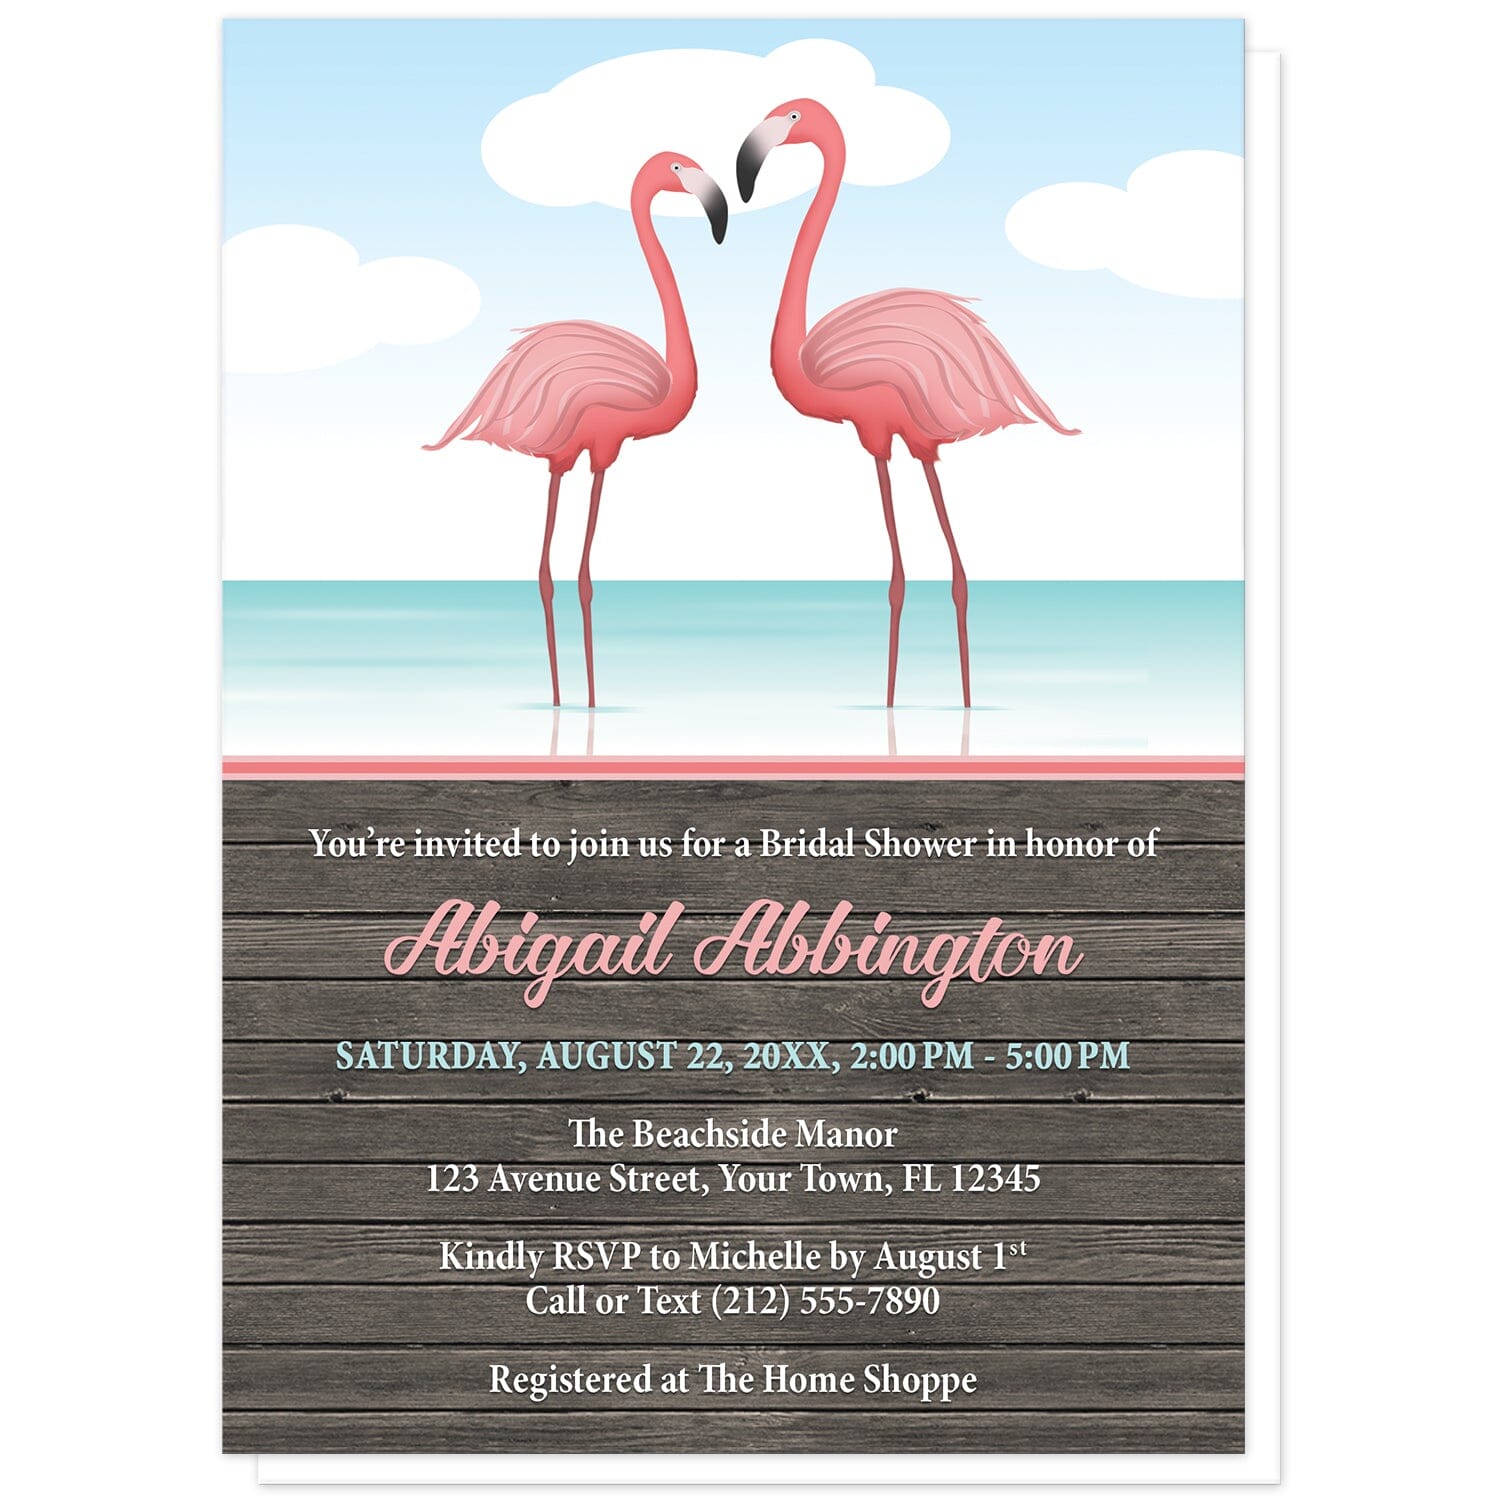 Flamingos in the Water Rustic Bridal Shower Invitations at Artistically Invited. Flamingos in the water rustic bridal shower invitations with a tropical illustration of two pink flamingos standing in the water. Your personalized bridal shower celebration details are custom printed in pink, teal, and white over a brown rustic wood background design below the flamingos.